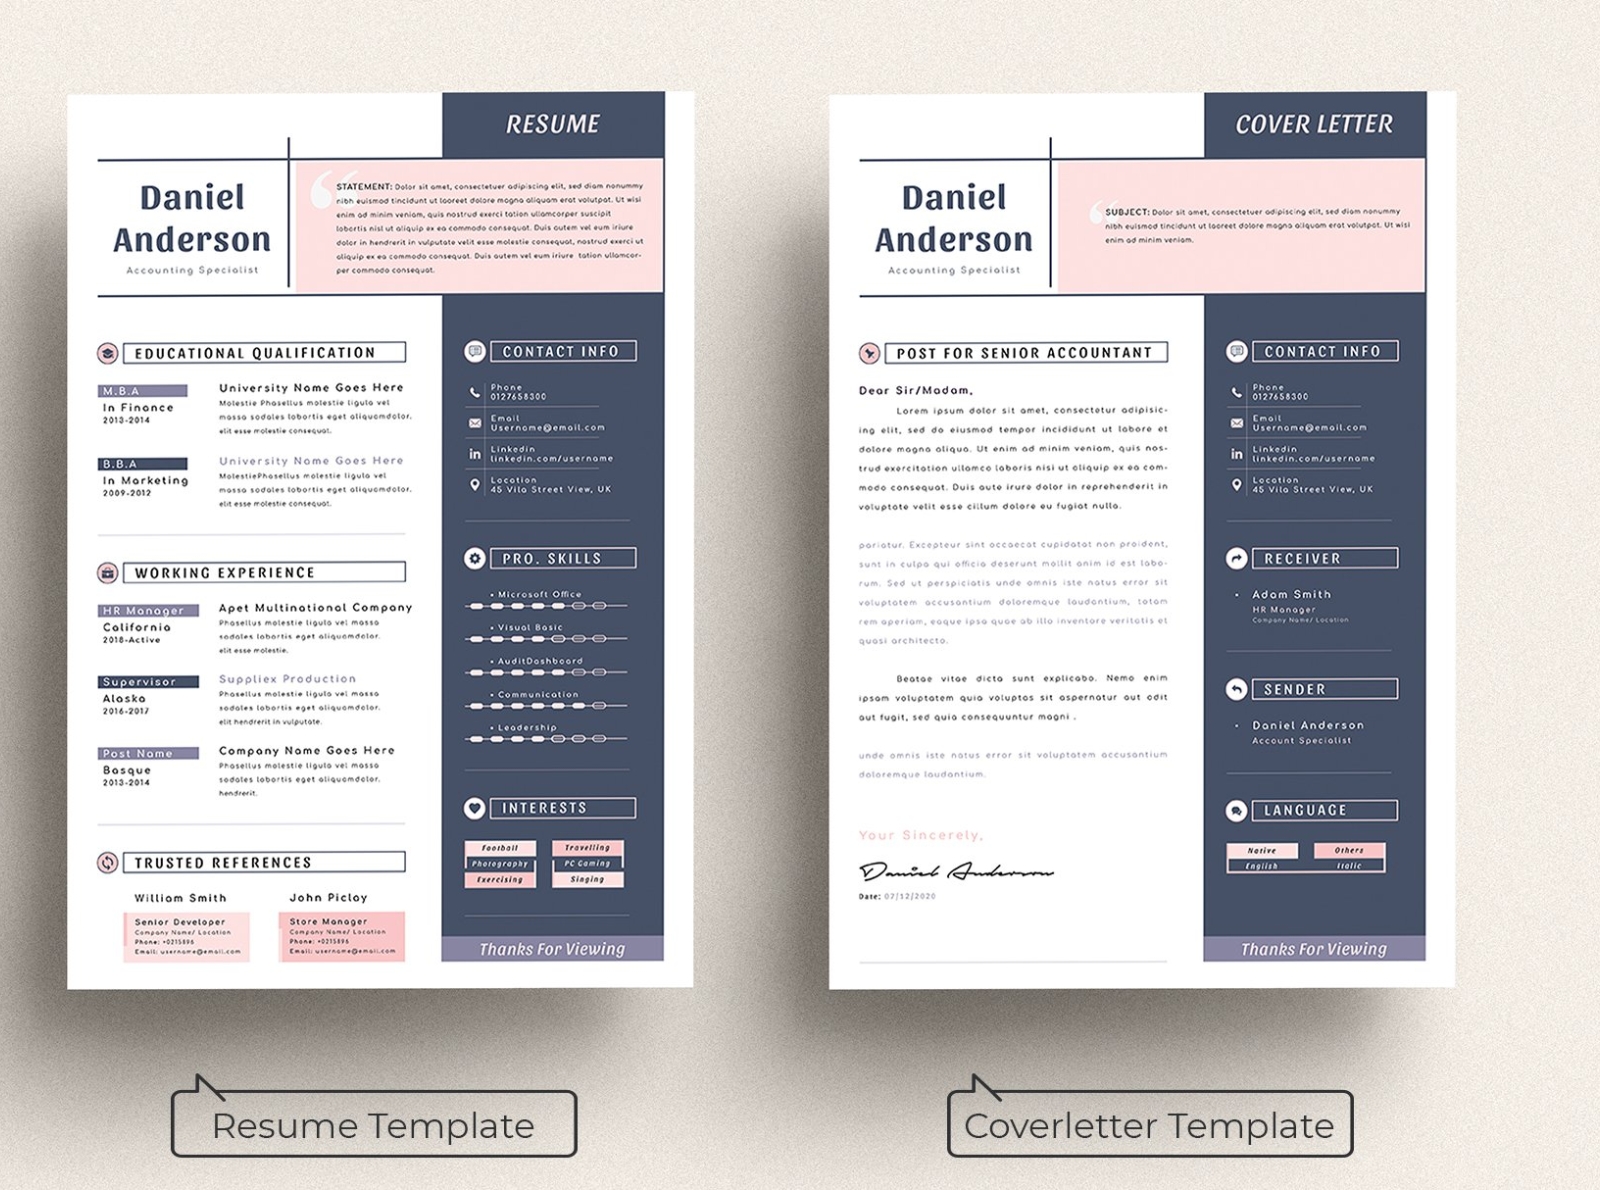 resume templates for mac pages free